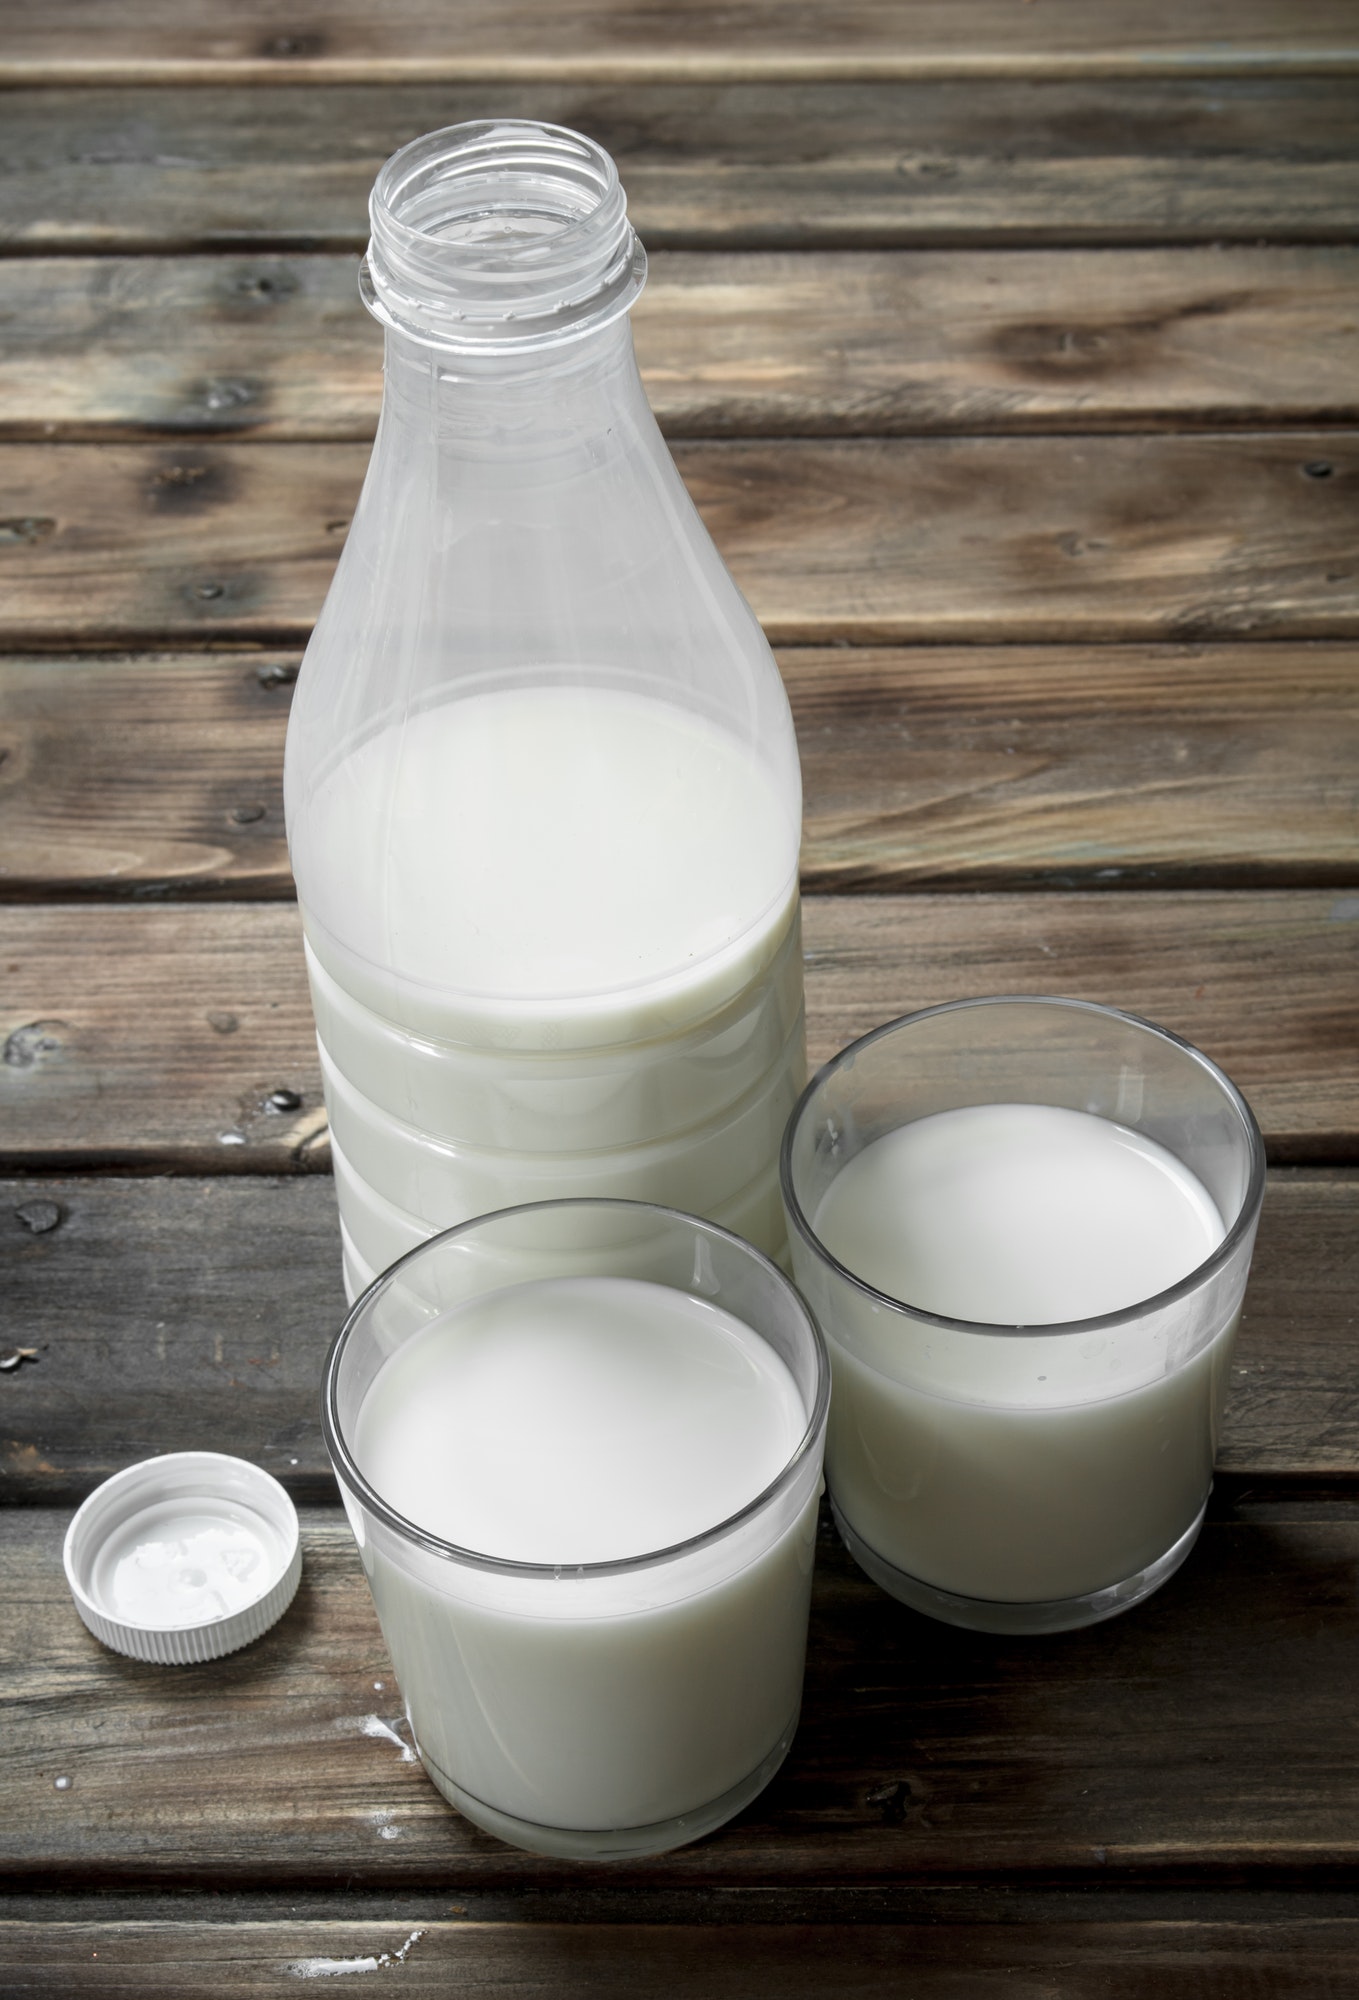 Compostable milk bottles are 100% plant-based bottles, Non-GMO, no toxic.